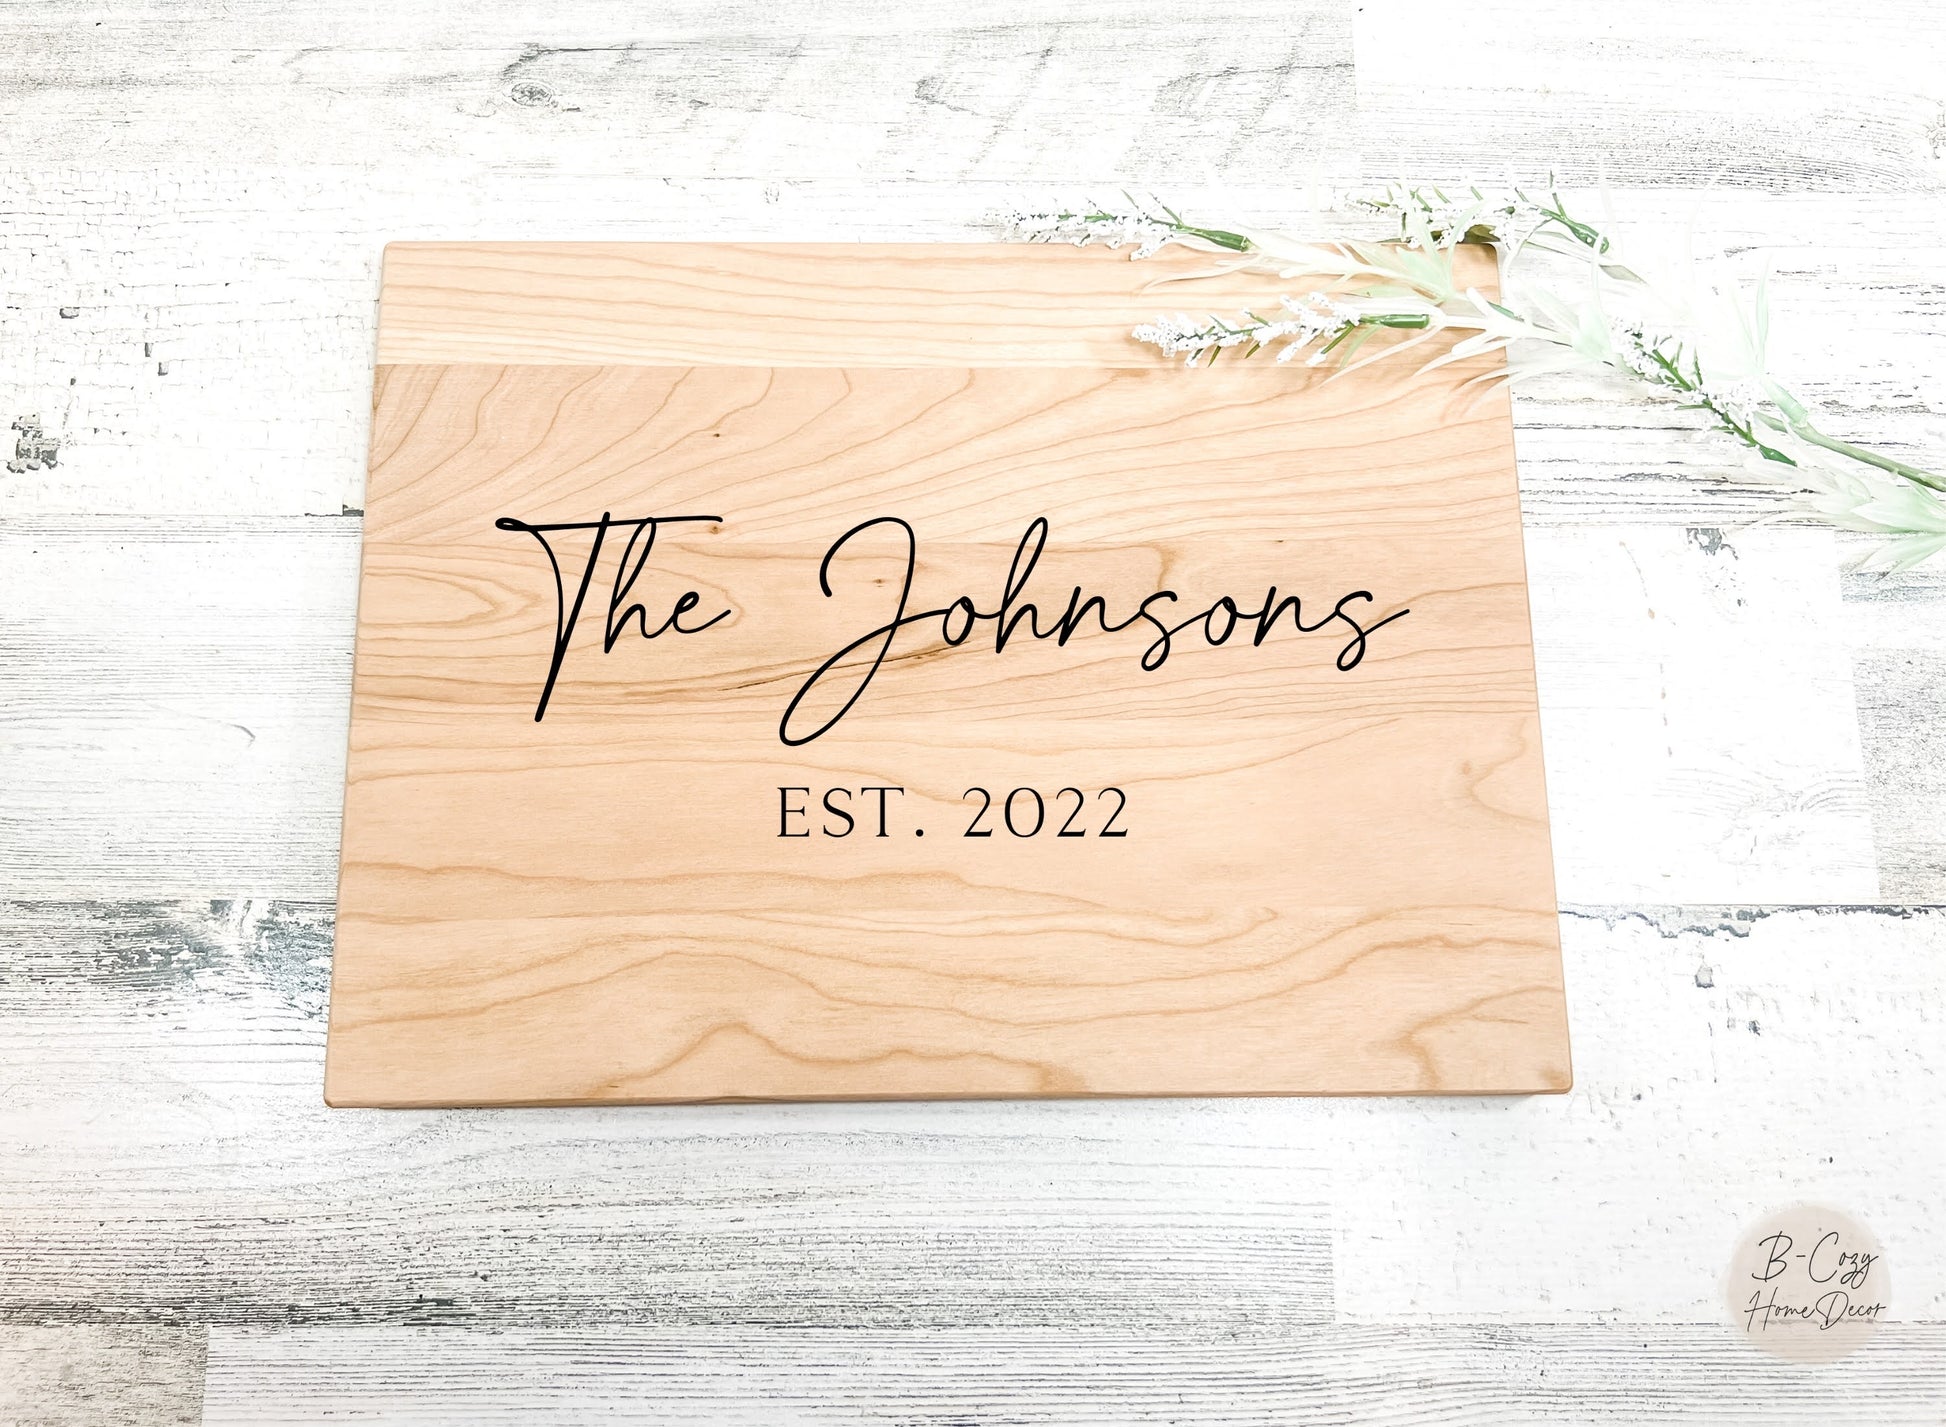 Cutting Board Decor with Last Name and Established Date